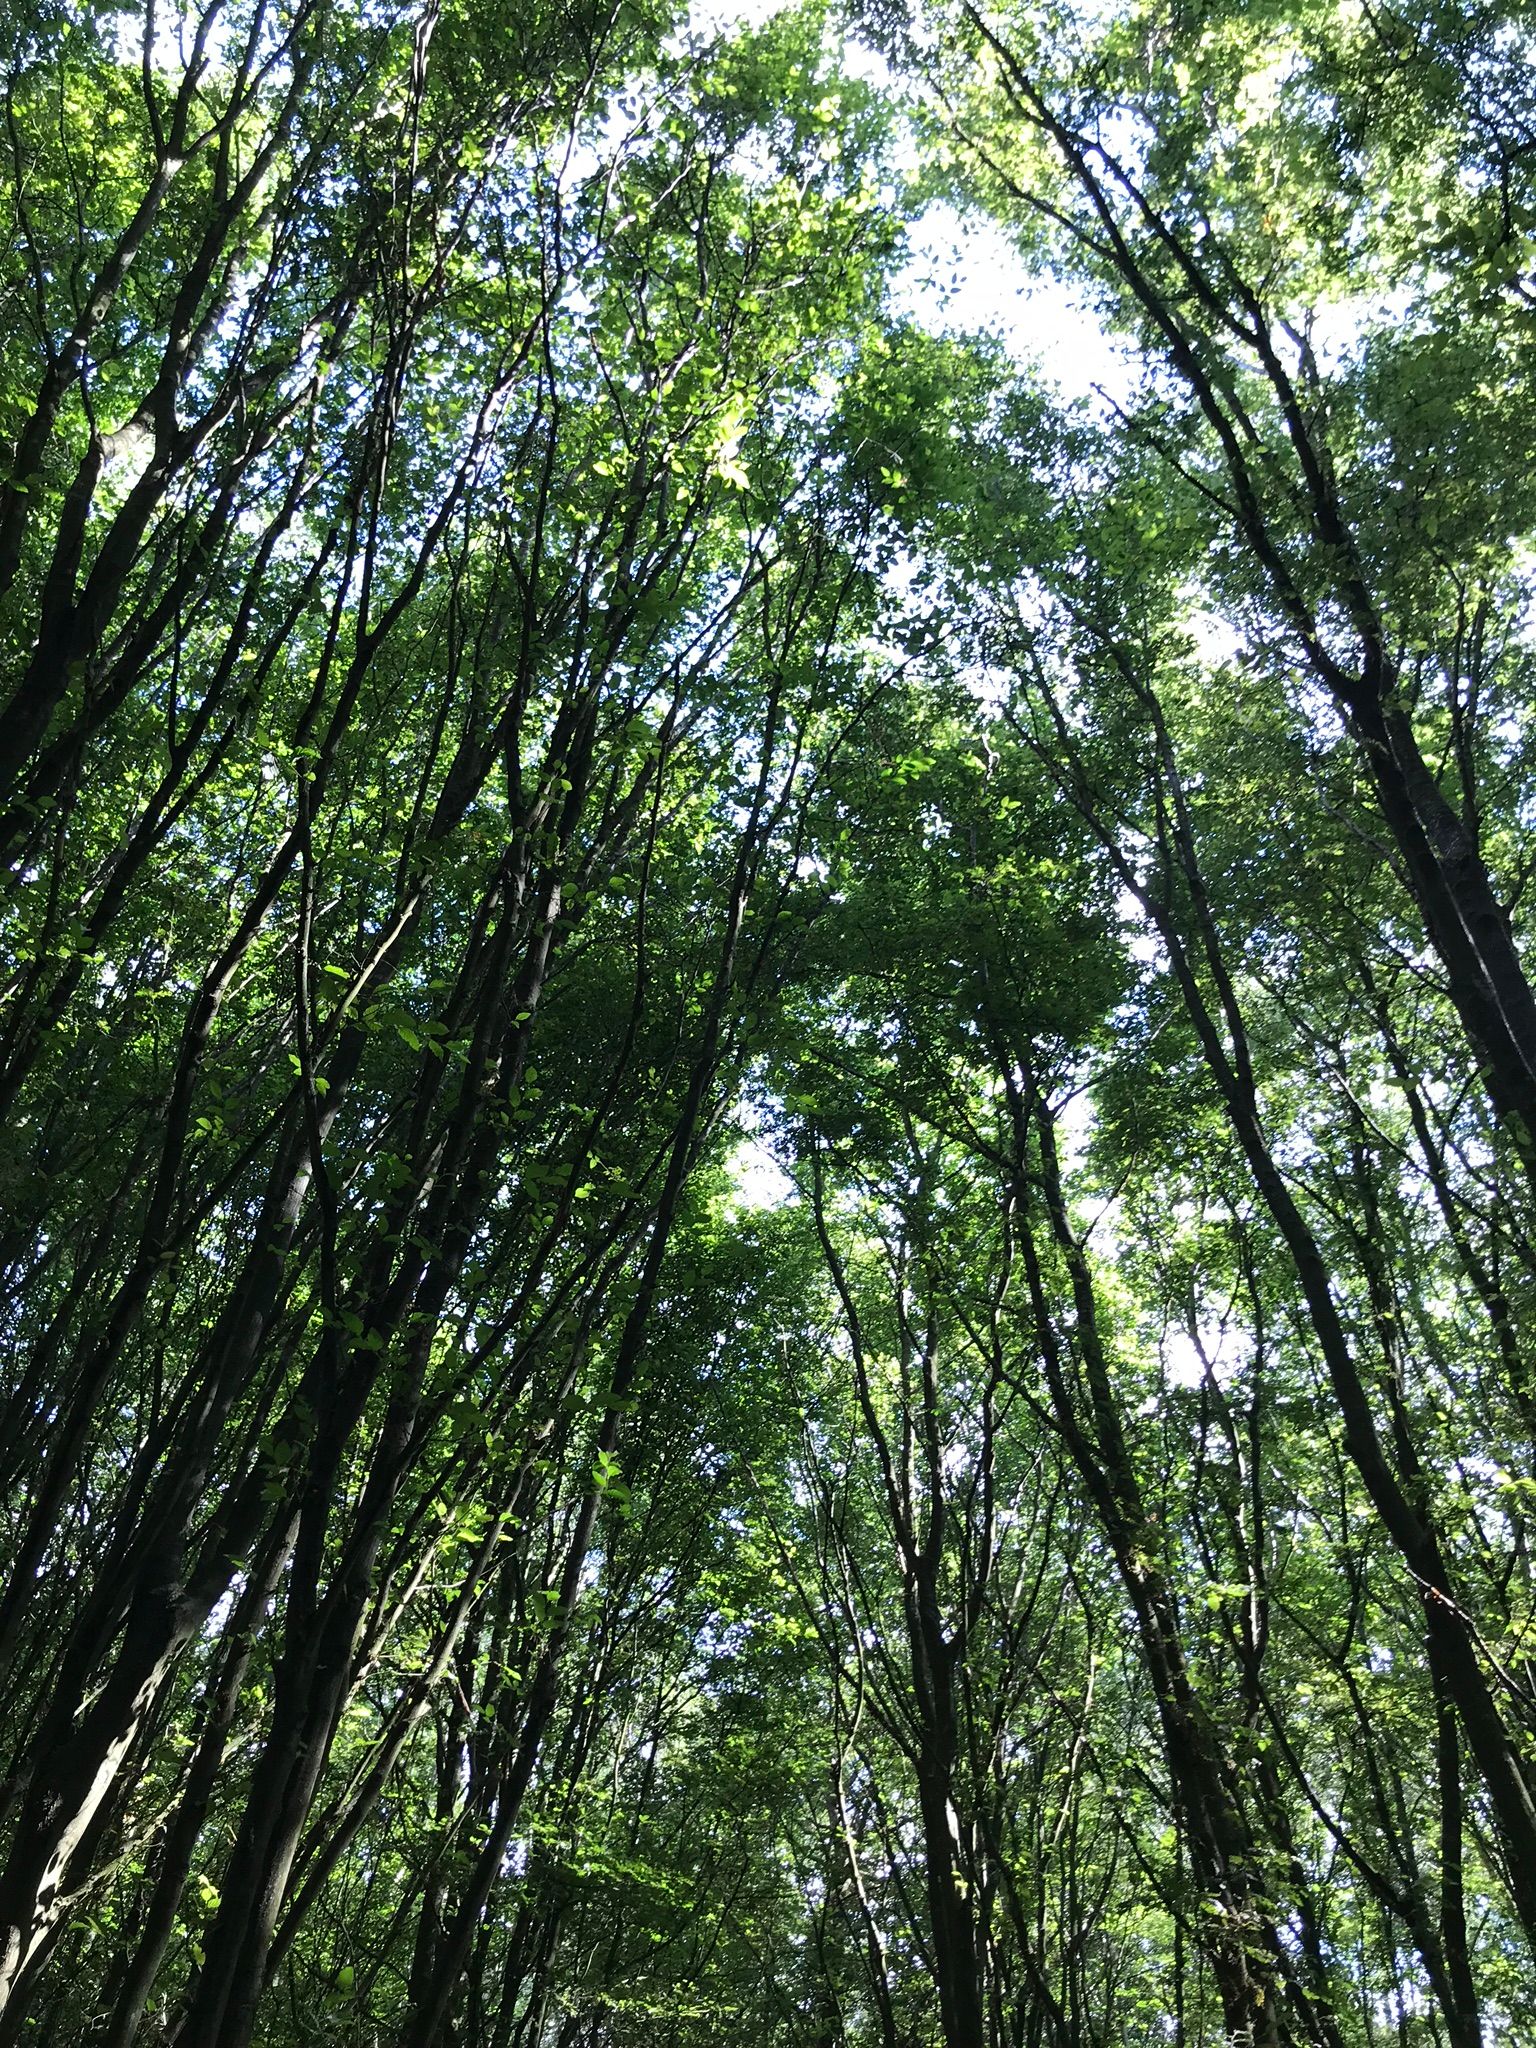 Looking up in to the tall trees in the woodland behind lordswood play area